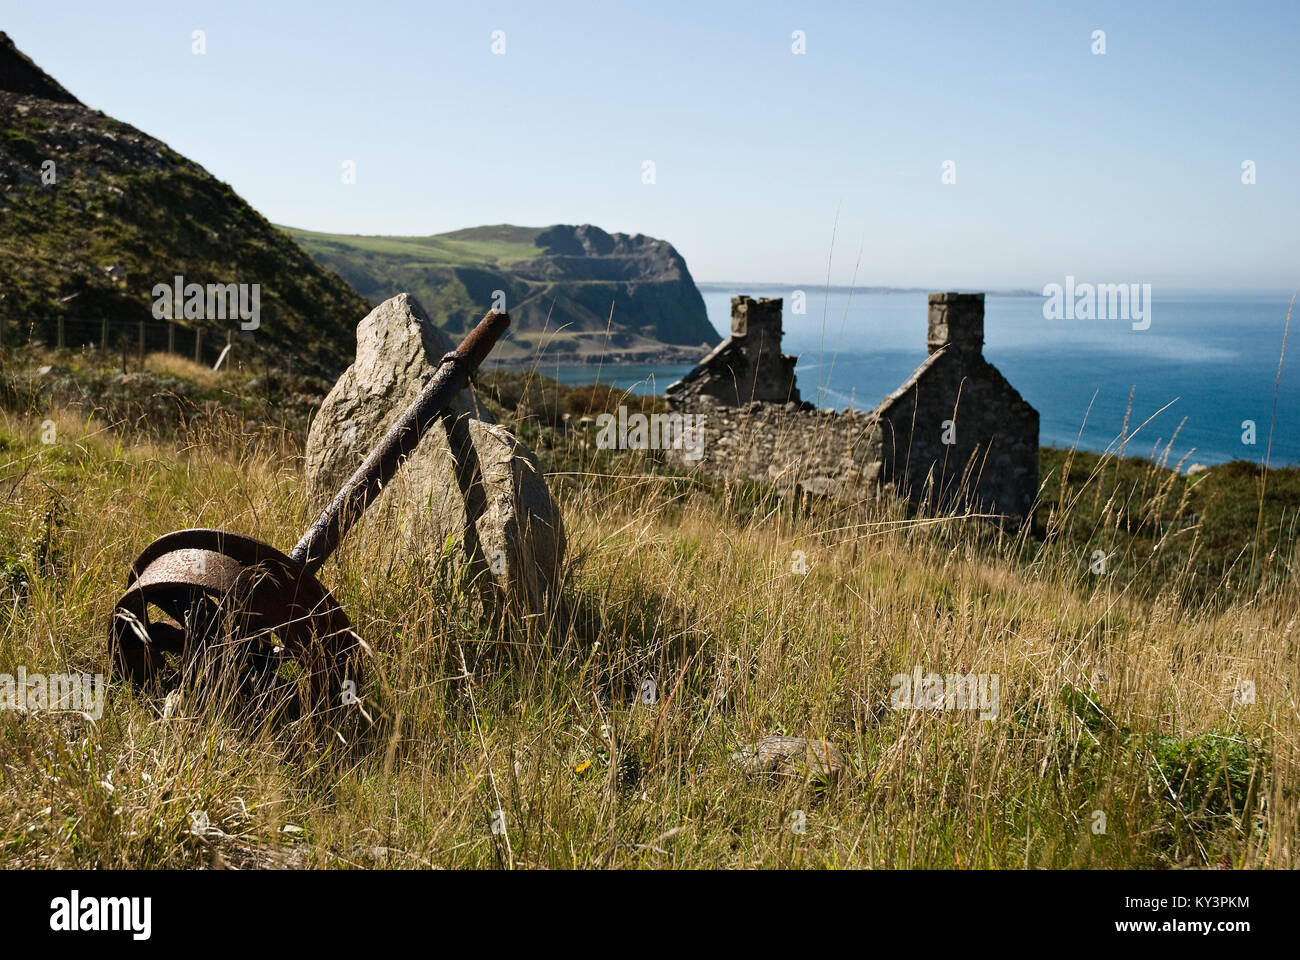 View from Nant Gwrtheyrn, the Welsh Language and Heritage Centre, Llyn Peninsula, Gwynedd, North wales UK Stock Photo